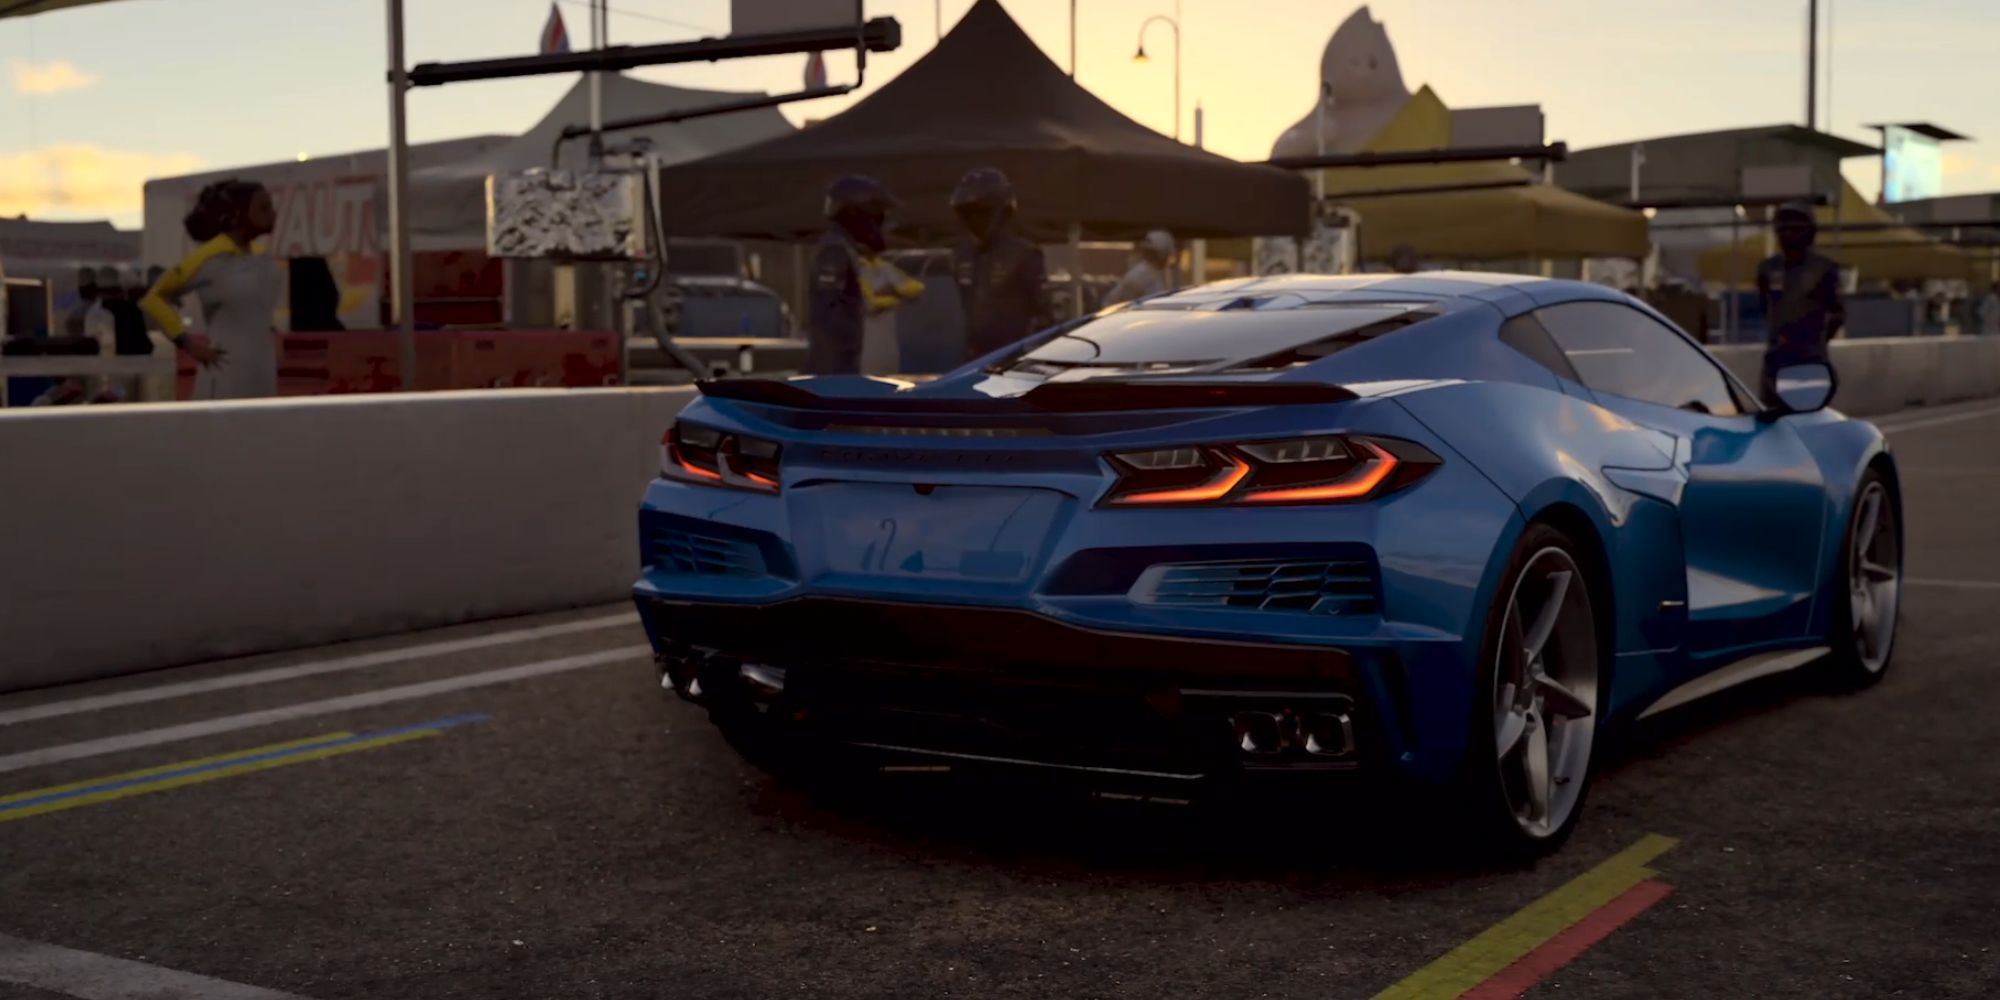 Forza Motorsport on X: #ForzaMotorsport launches on October 10